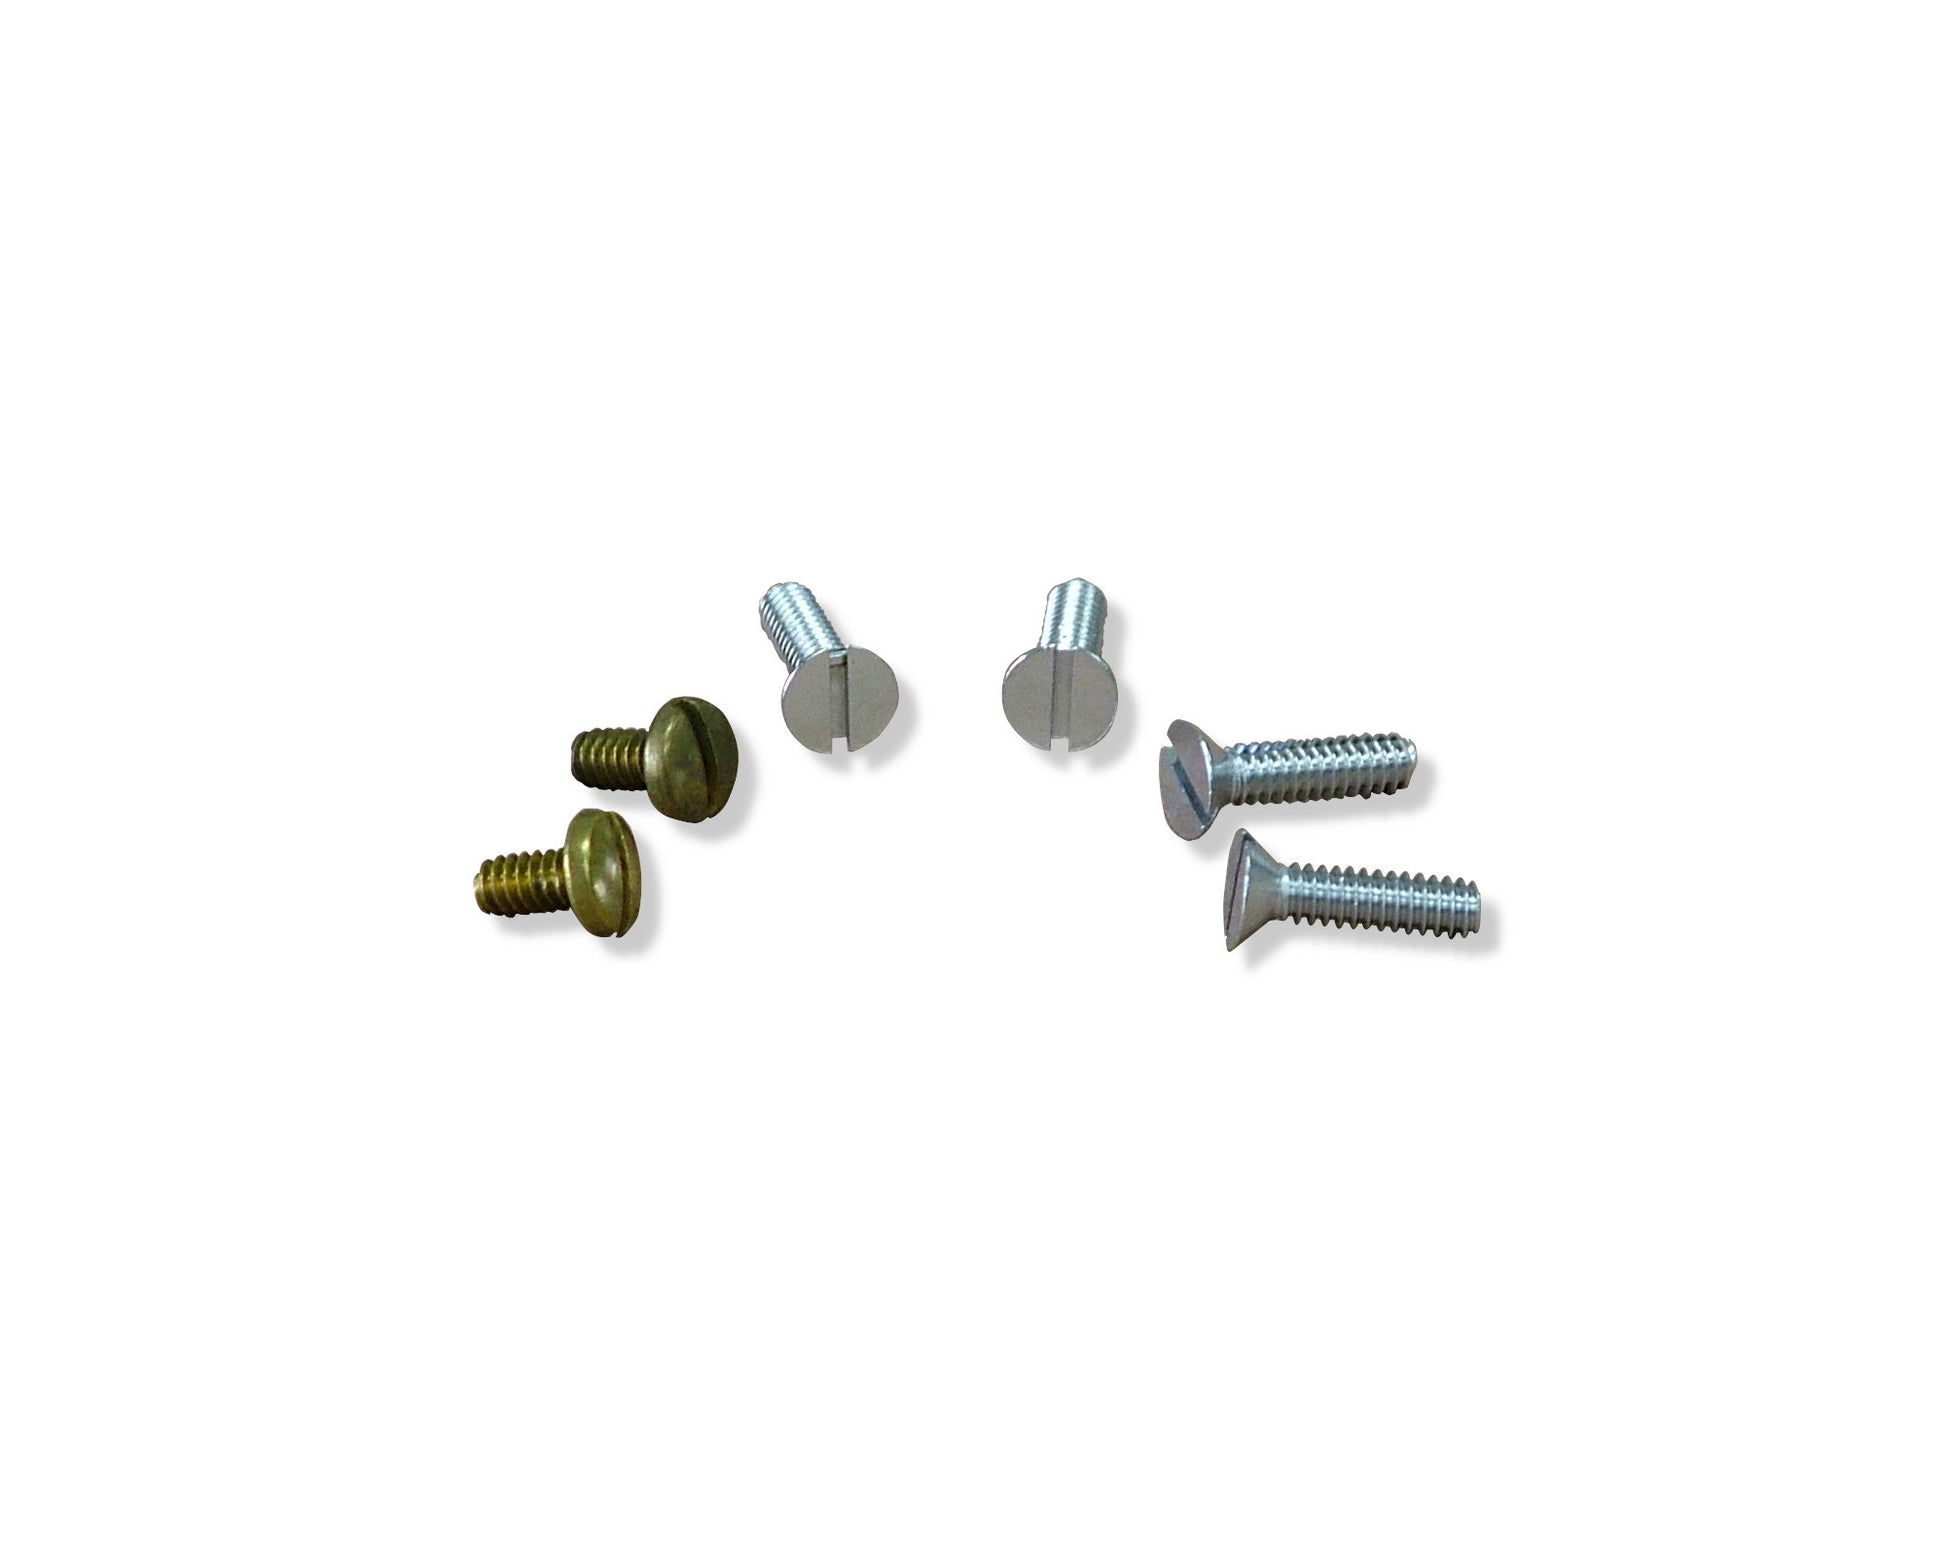 Bolts for Afras FIP Inlet/Outlet Fitting for Vinyl, Fiberglass and Steel Pools